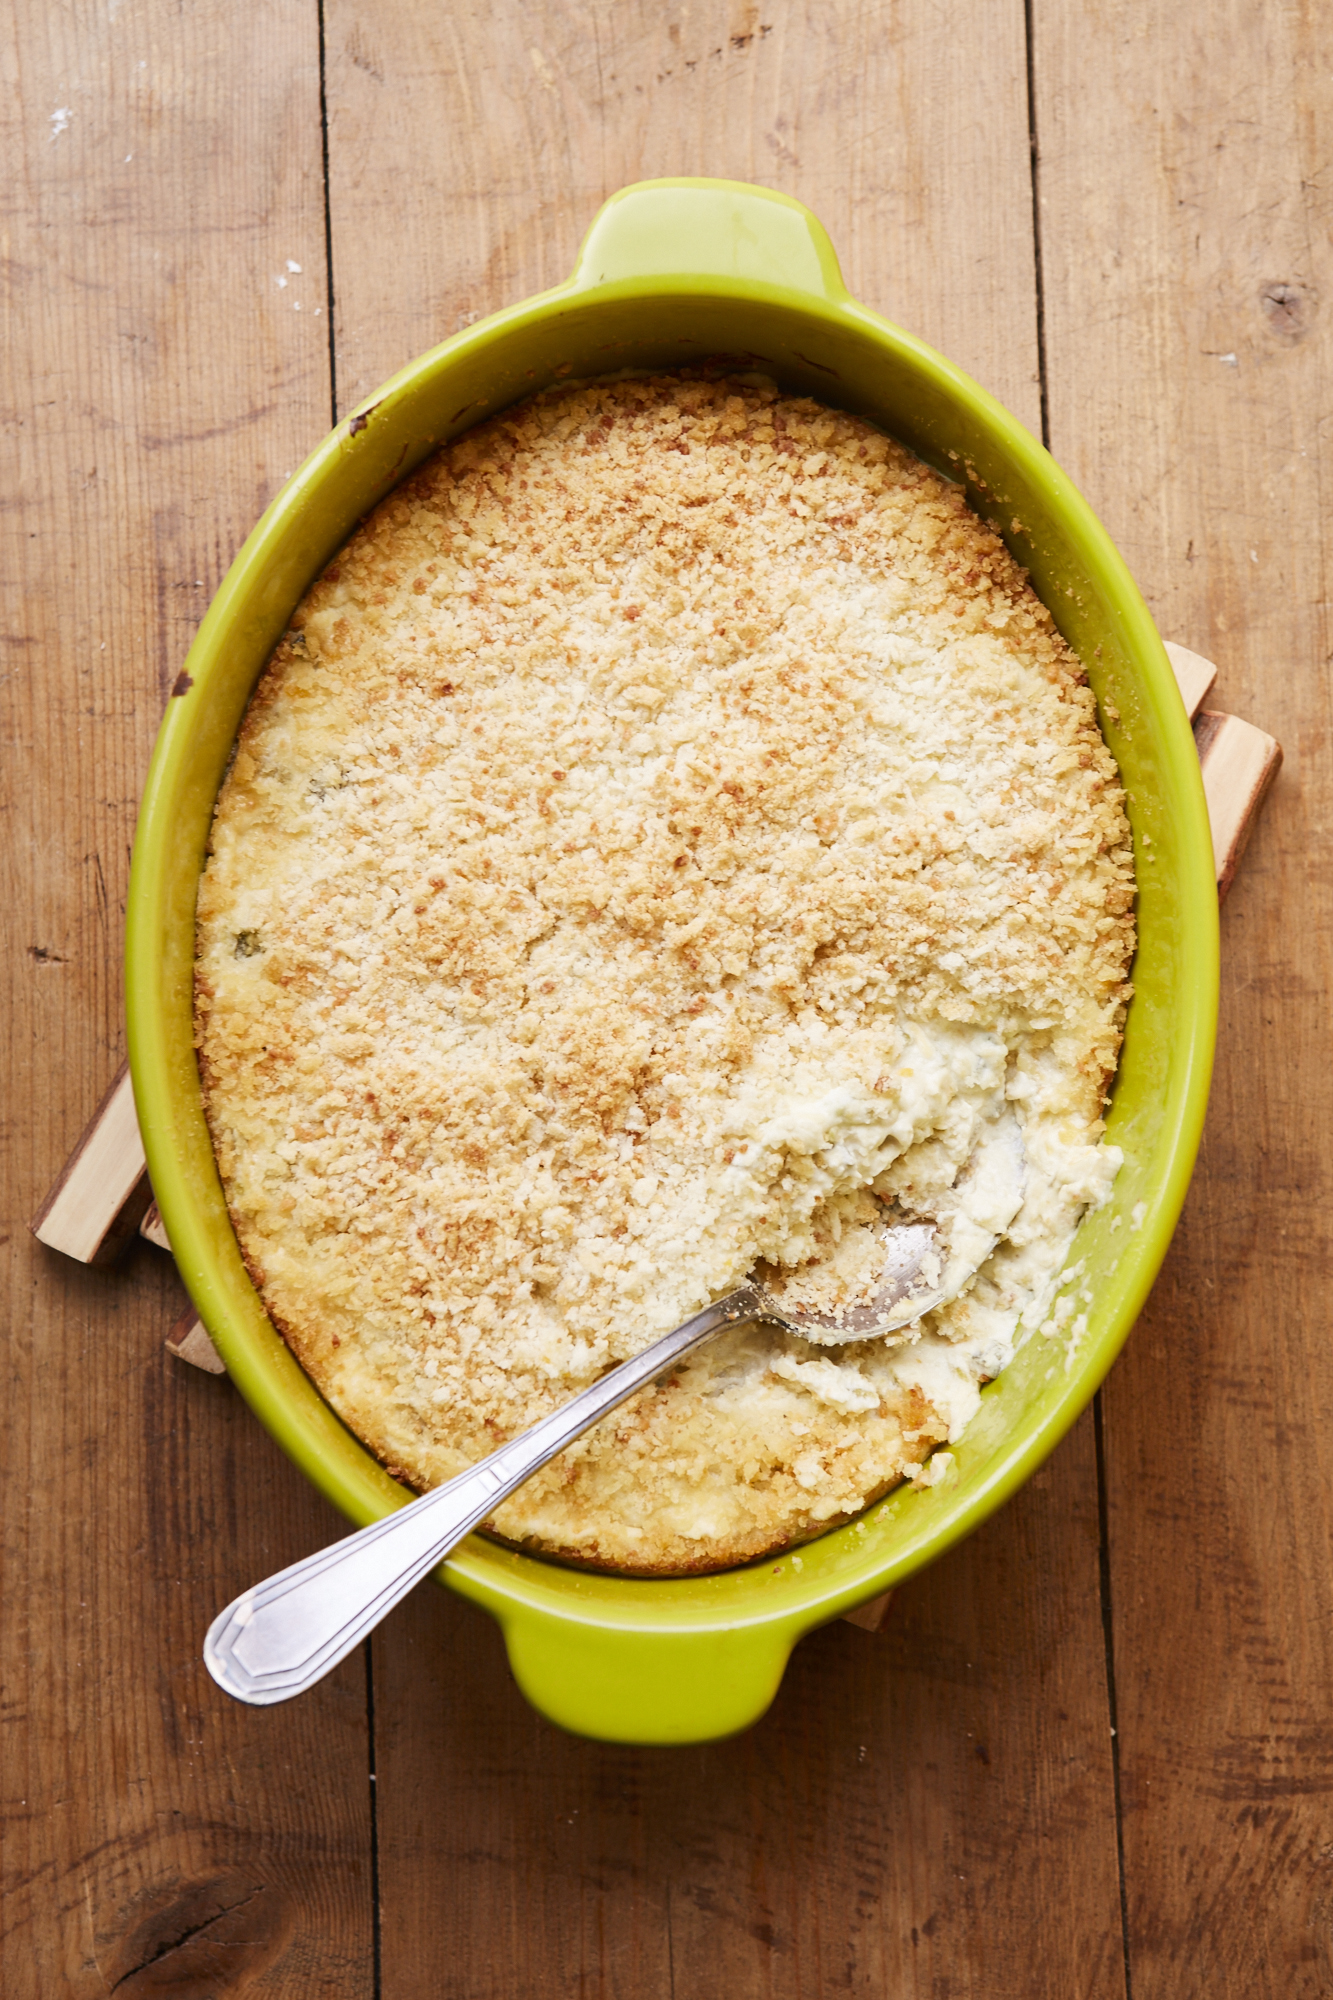 Hot Jalapeno Popper Dip in a green baking dish.